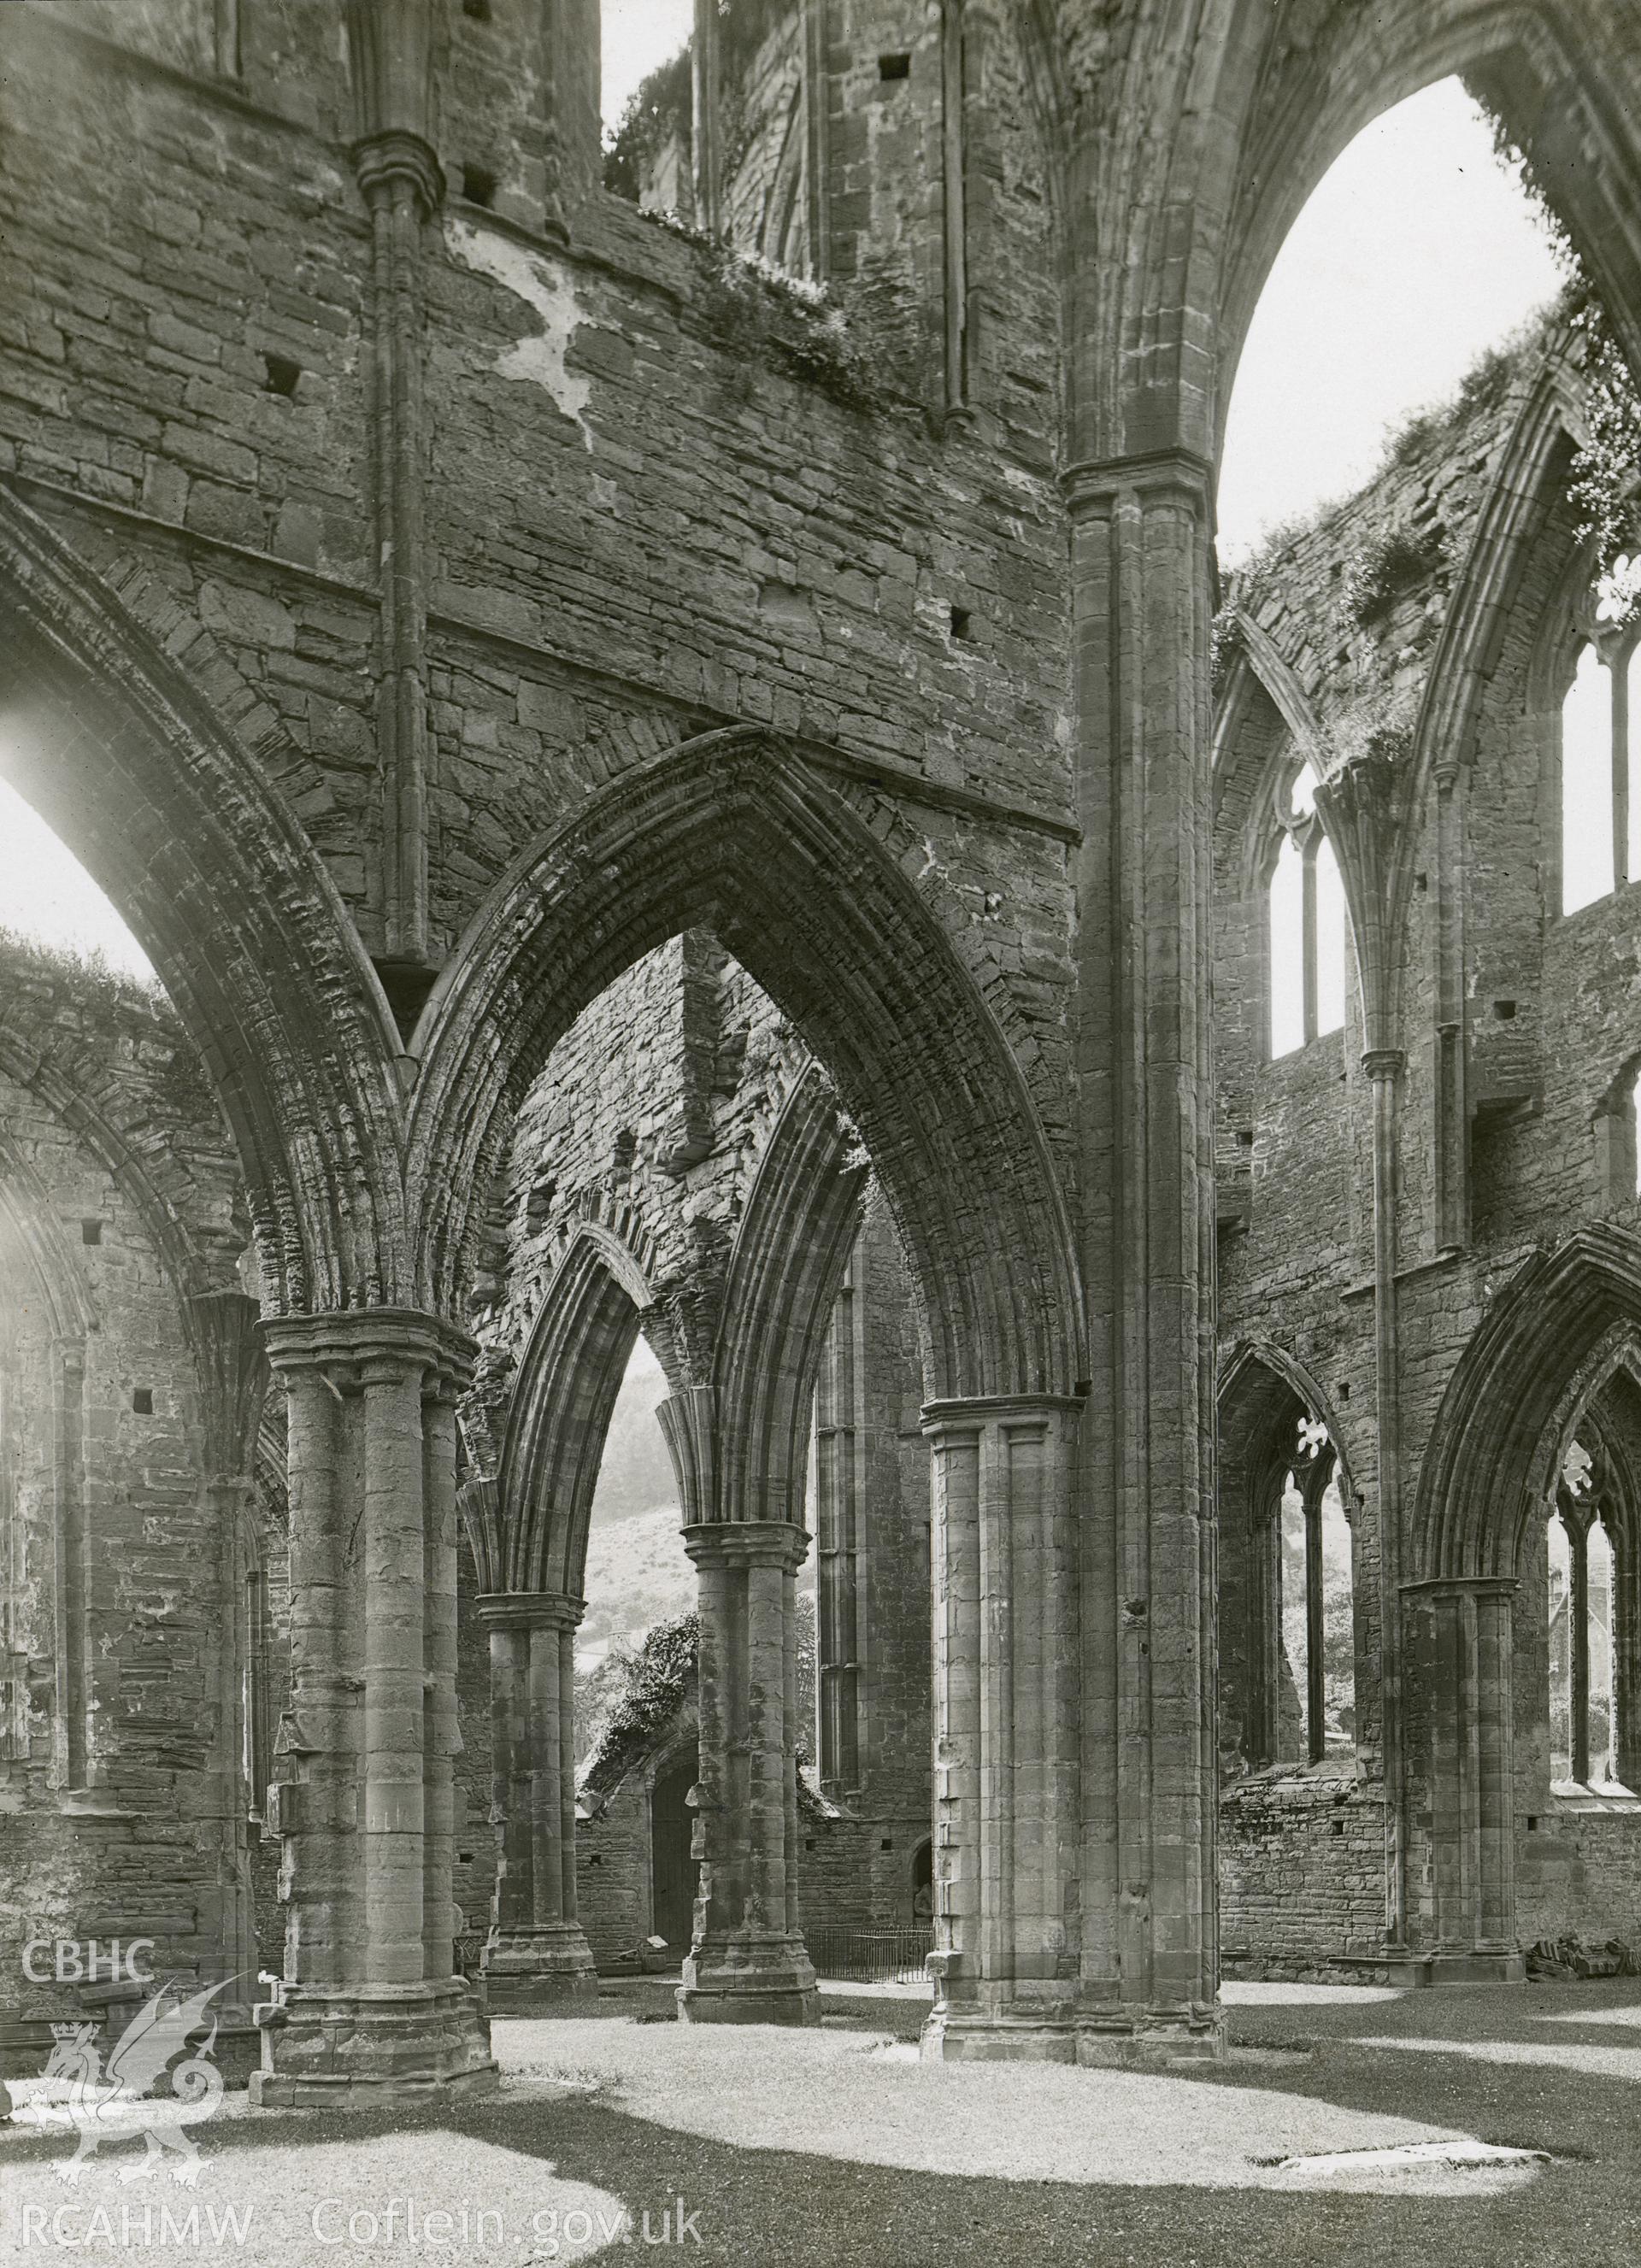 Digital copy of a National Buildings Record photograph showing interior view of Tintern Abbey.